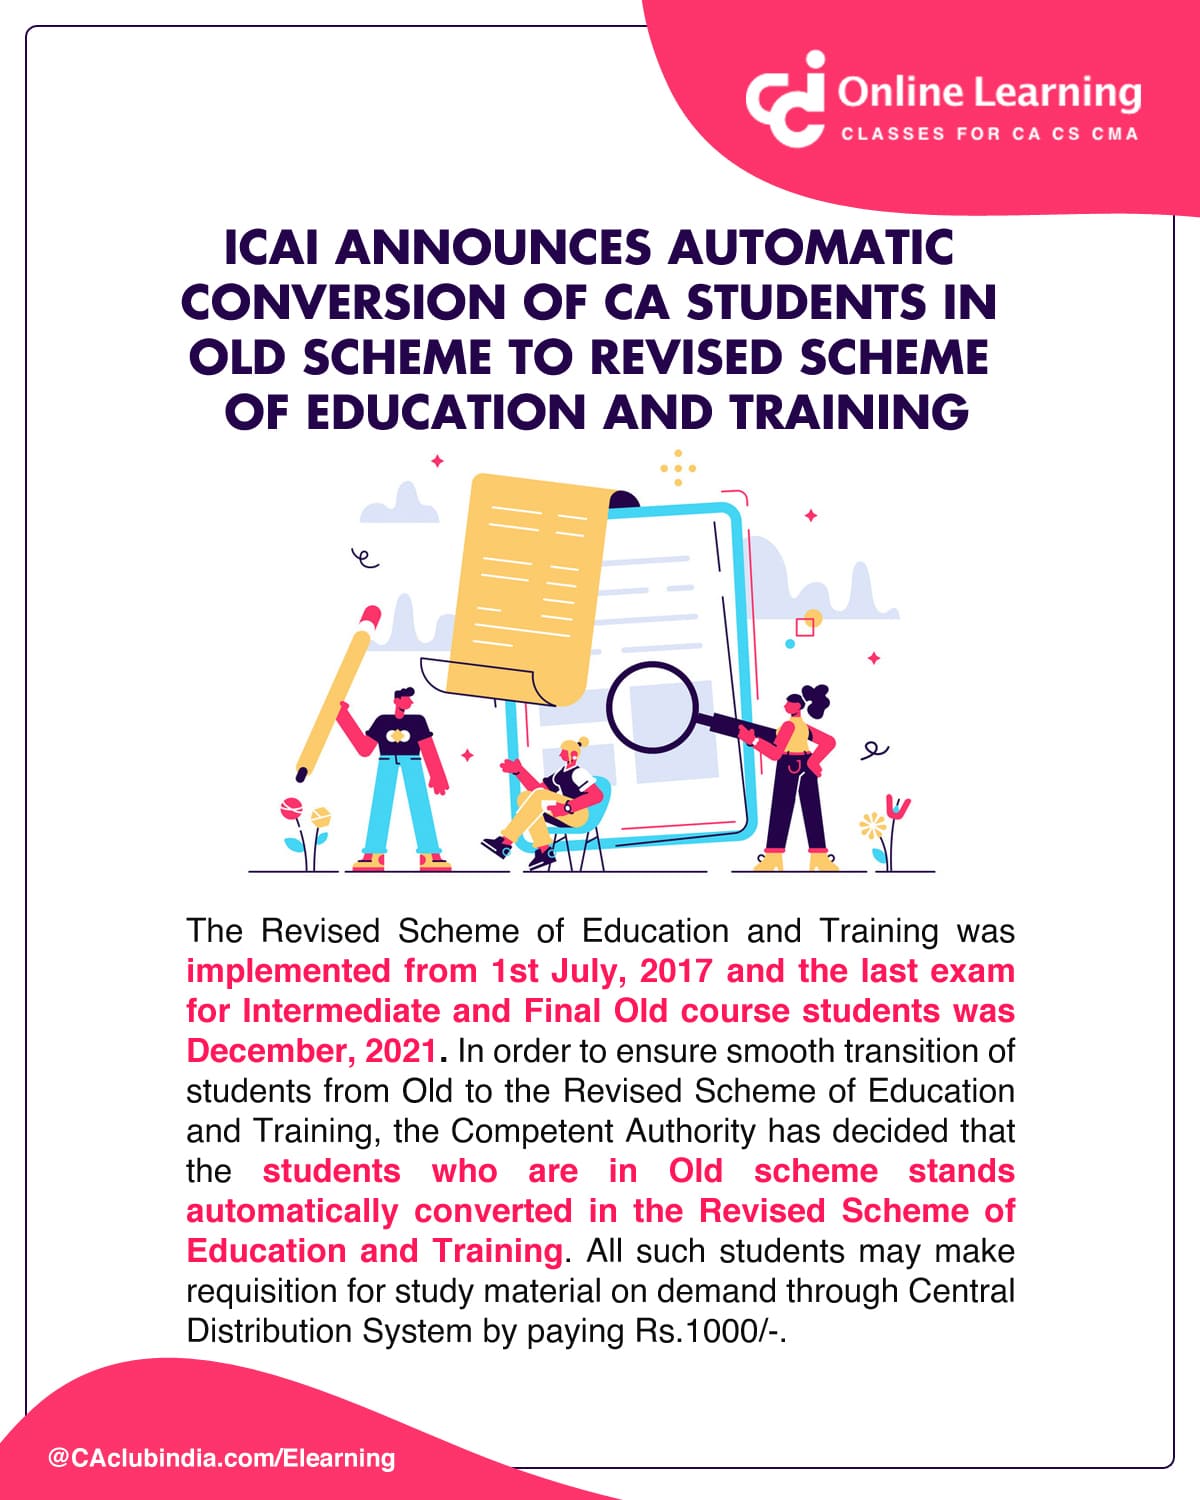 Automatic Conversion from Old Scheme to Revised Scheme of Education and Training